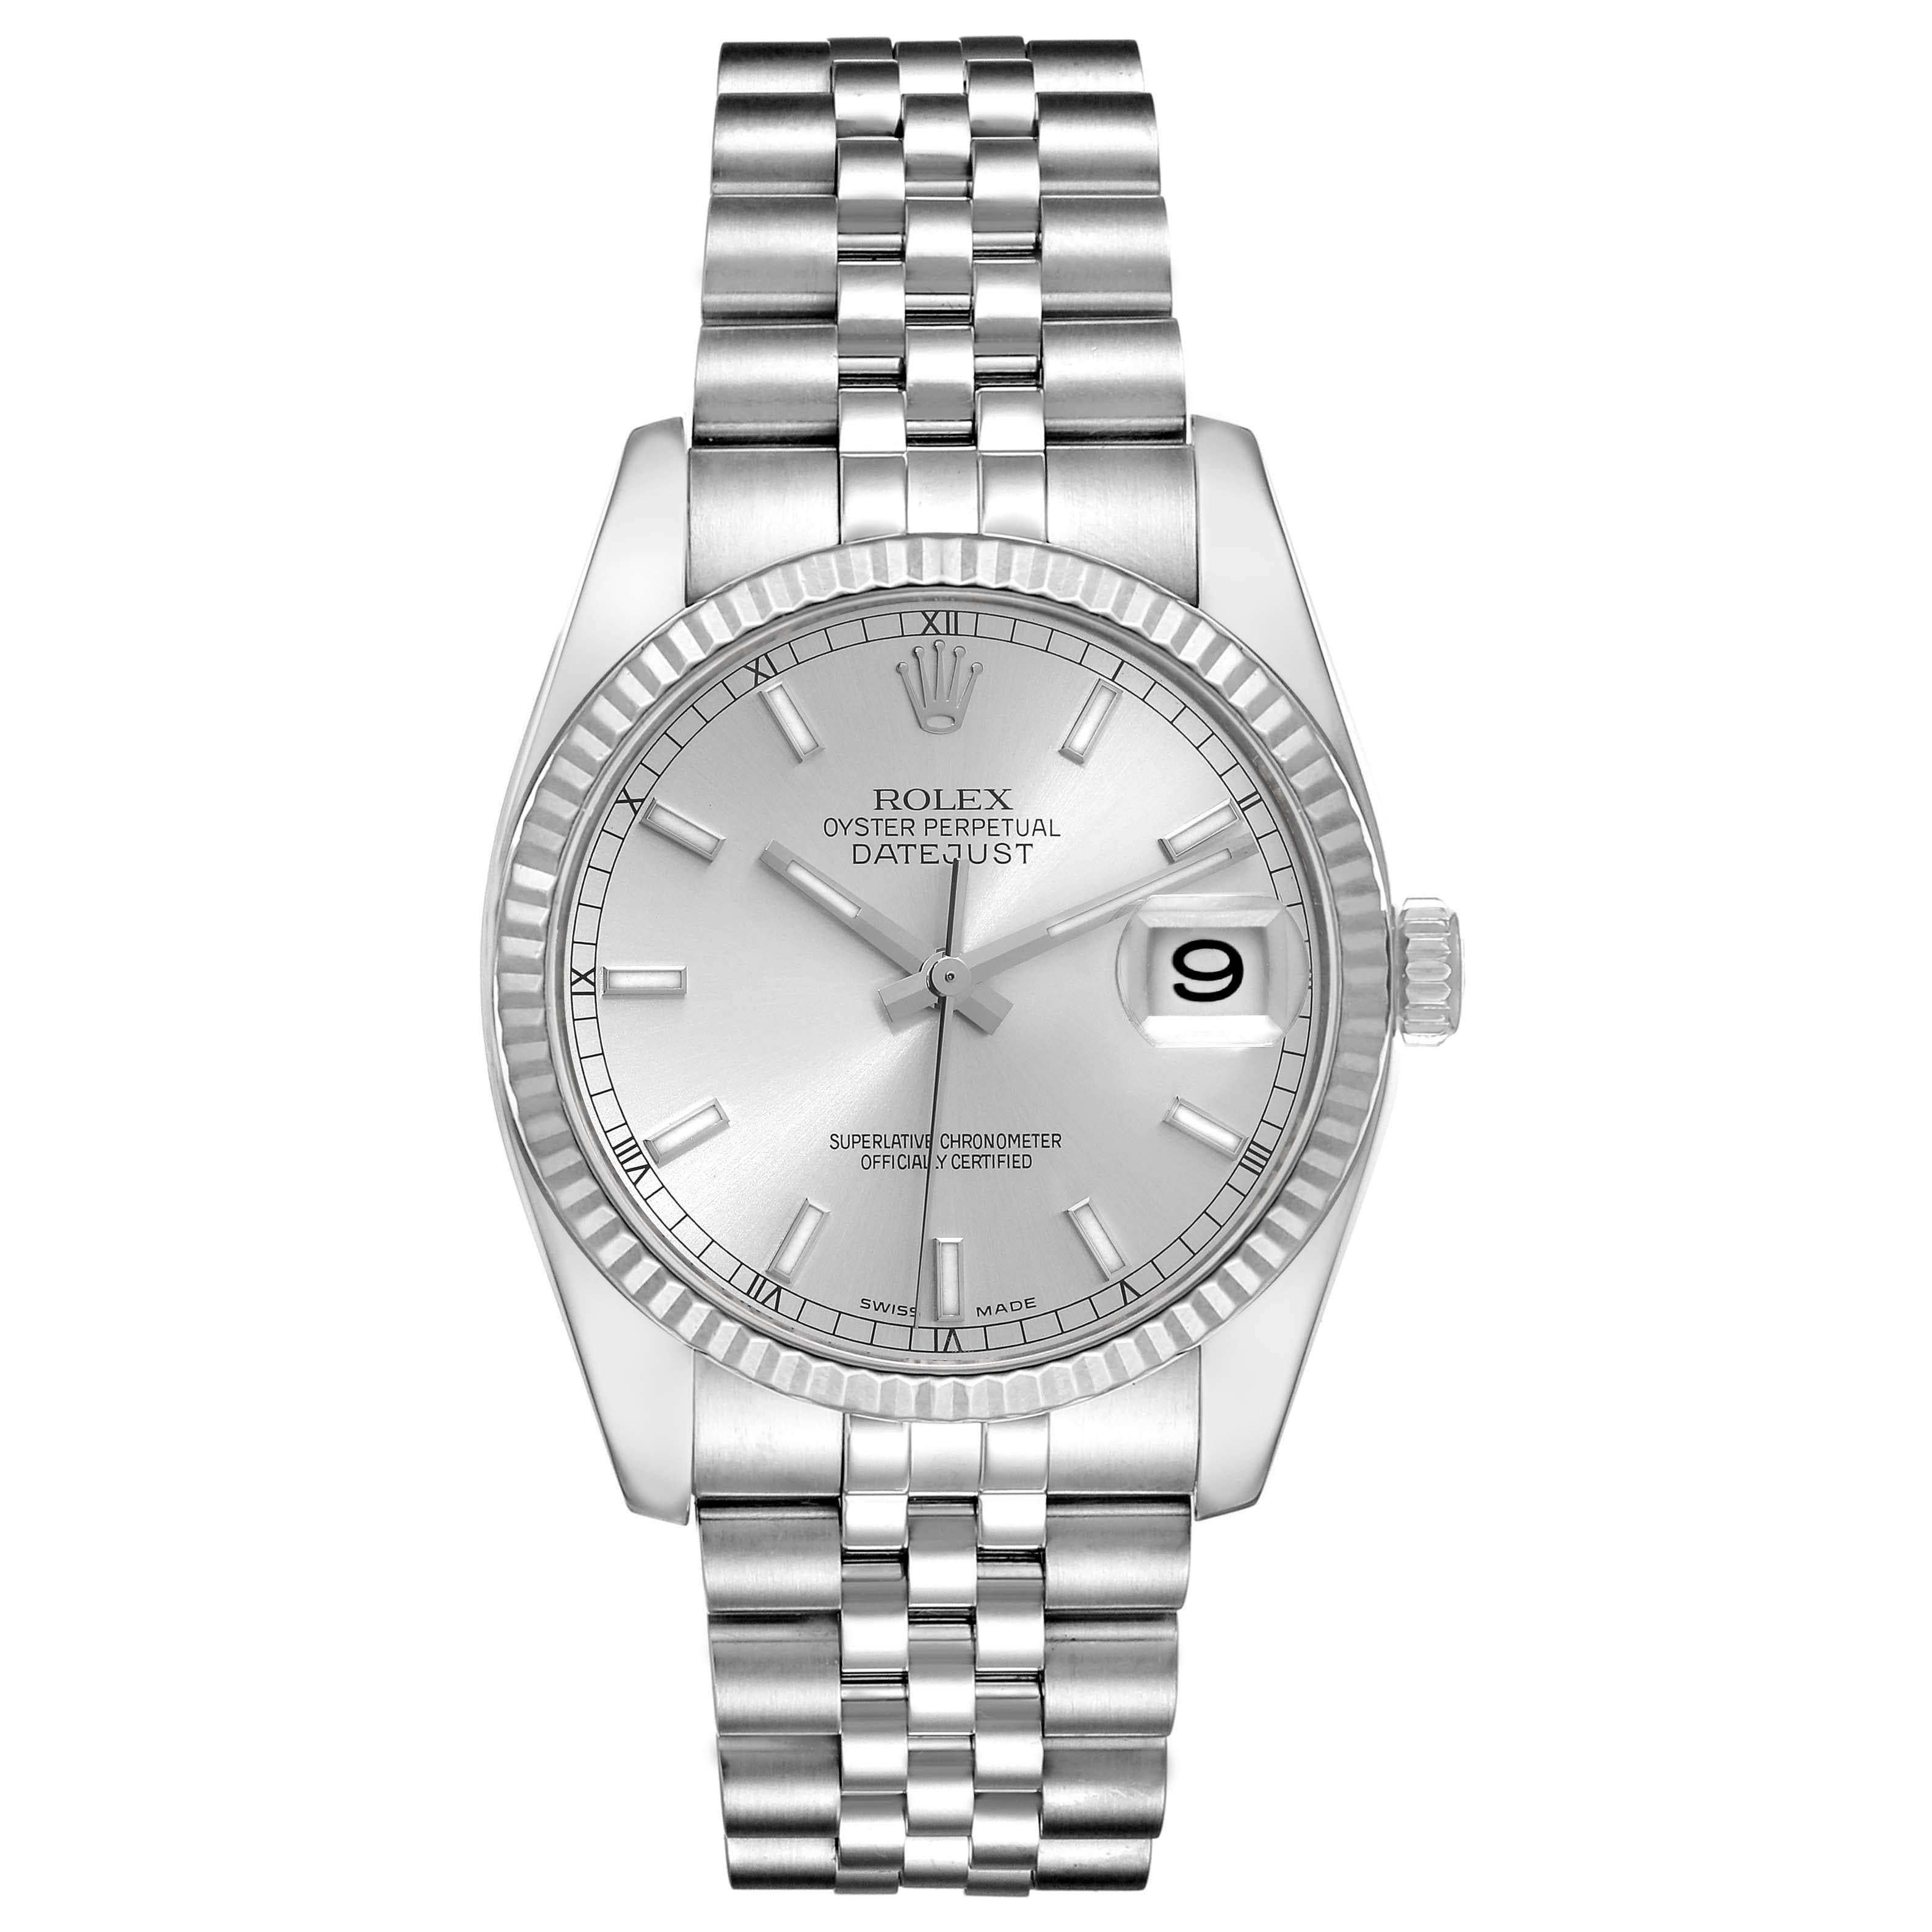 Men's Rolex Datejust Steel White Gold Silver Dial Mens Watch 116234 Box Papers For Sale